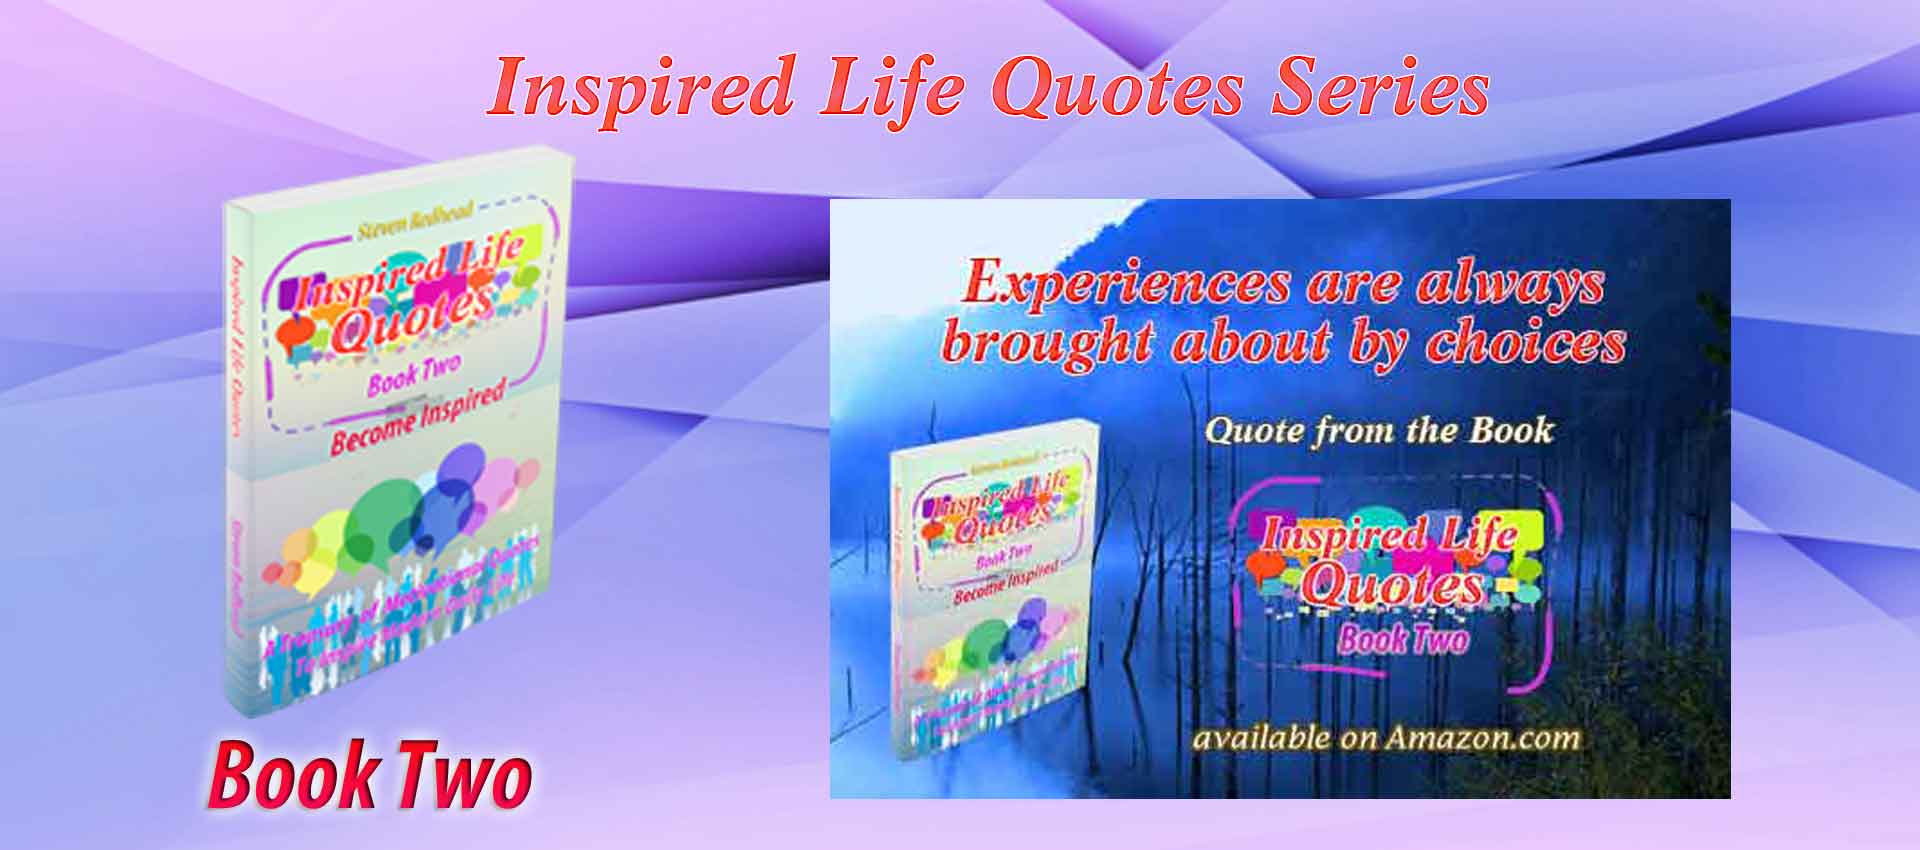 inspired life quotes book2 by steven redhead